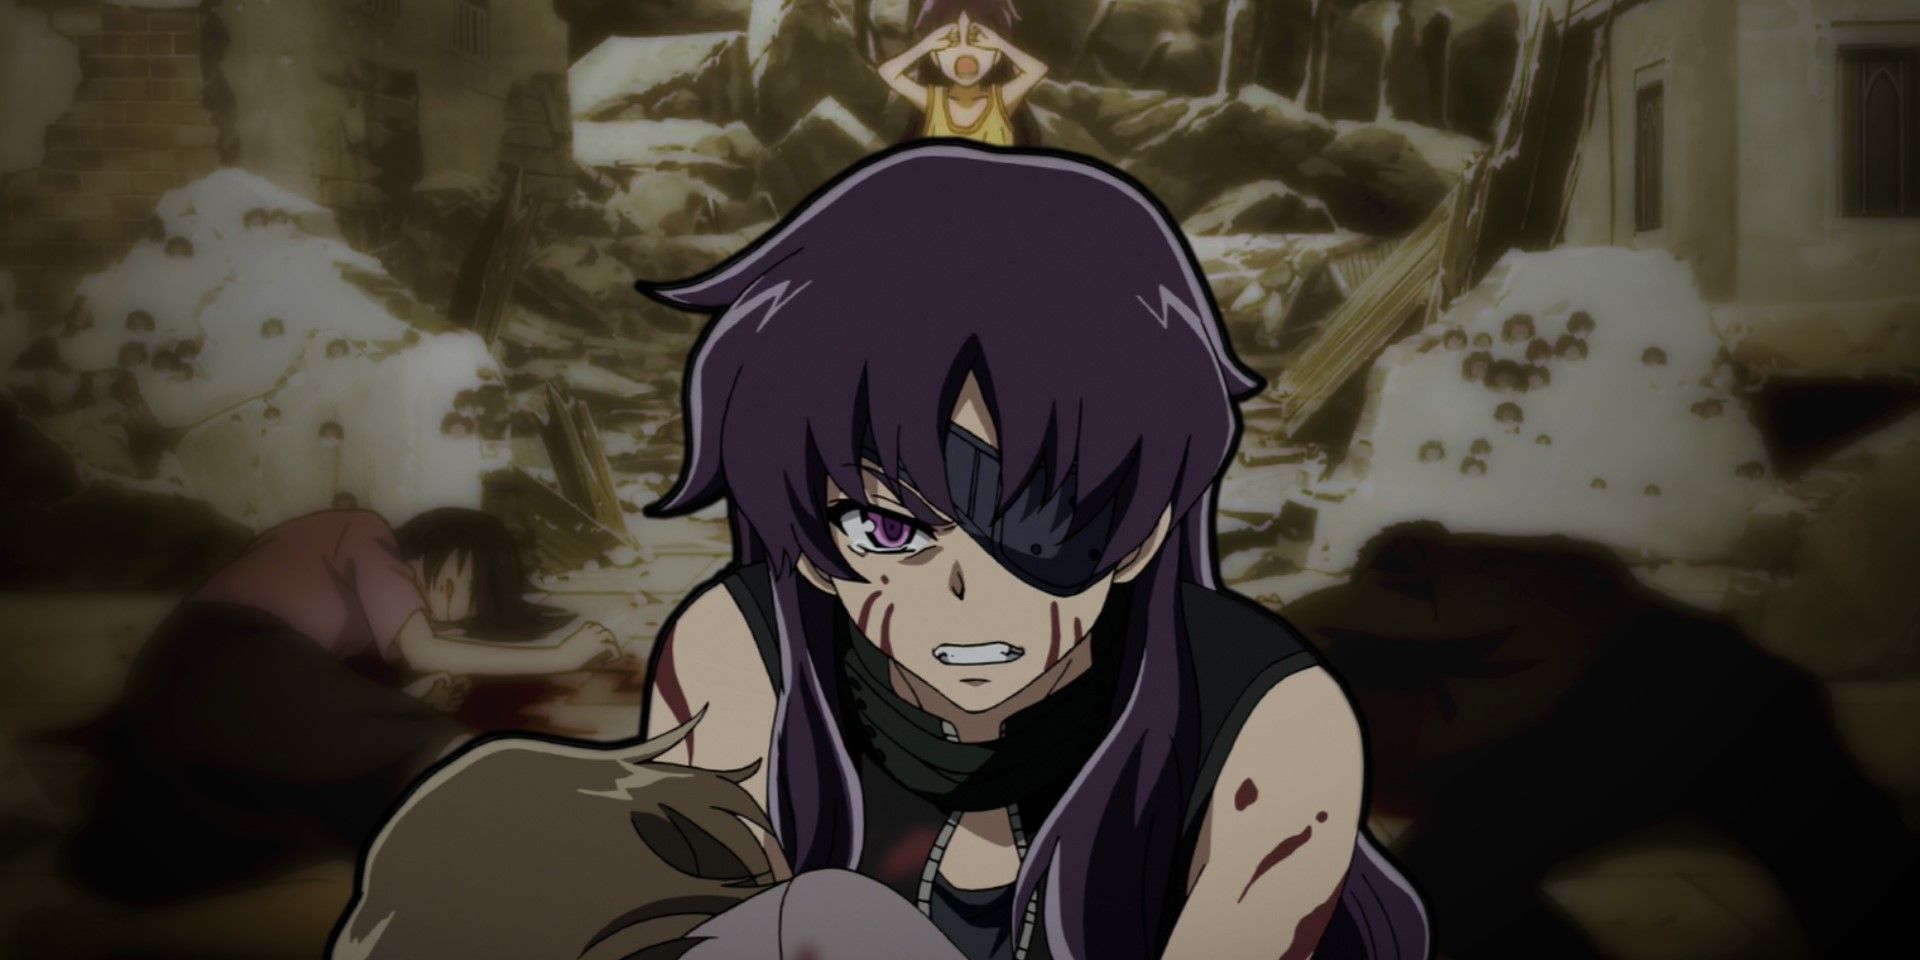 Minene Uryu from Future Diary loses so much.